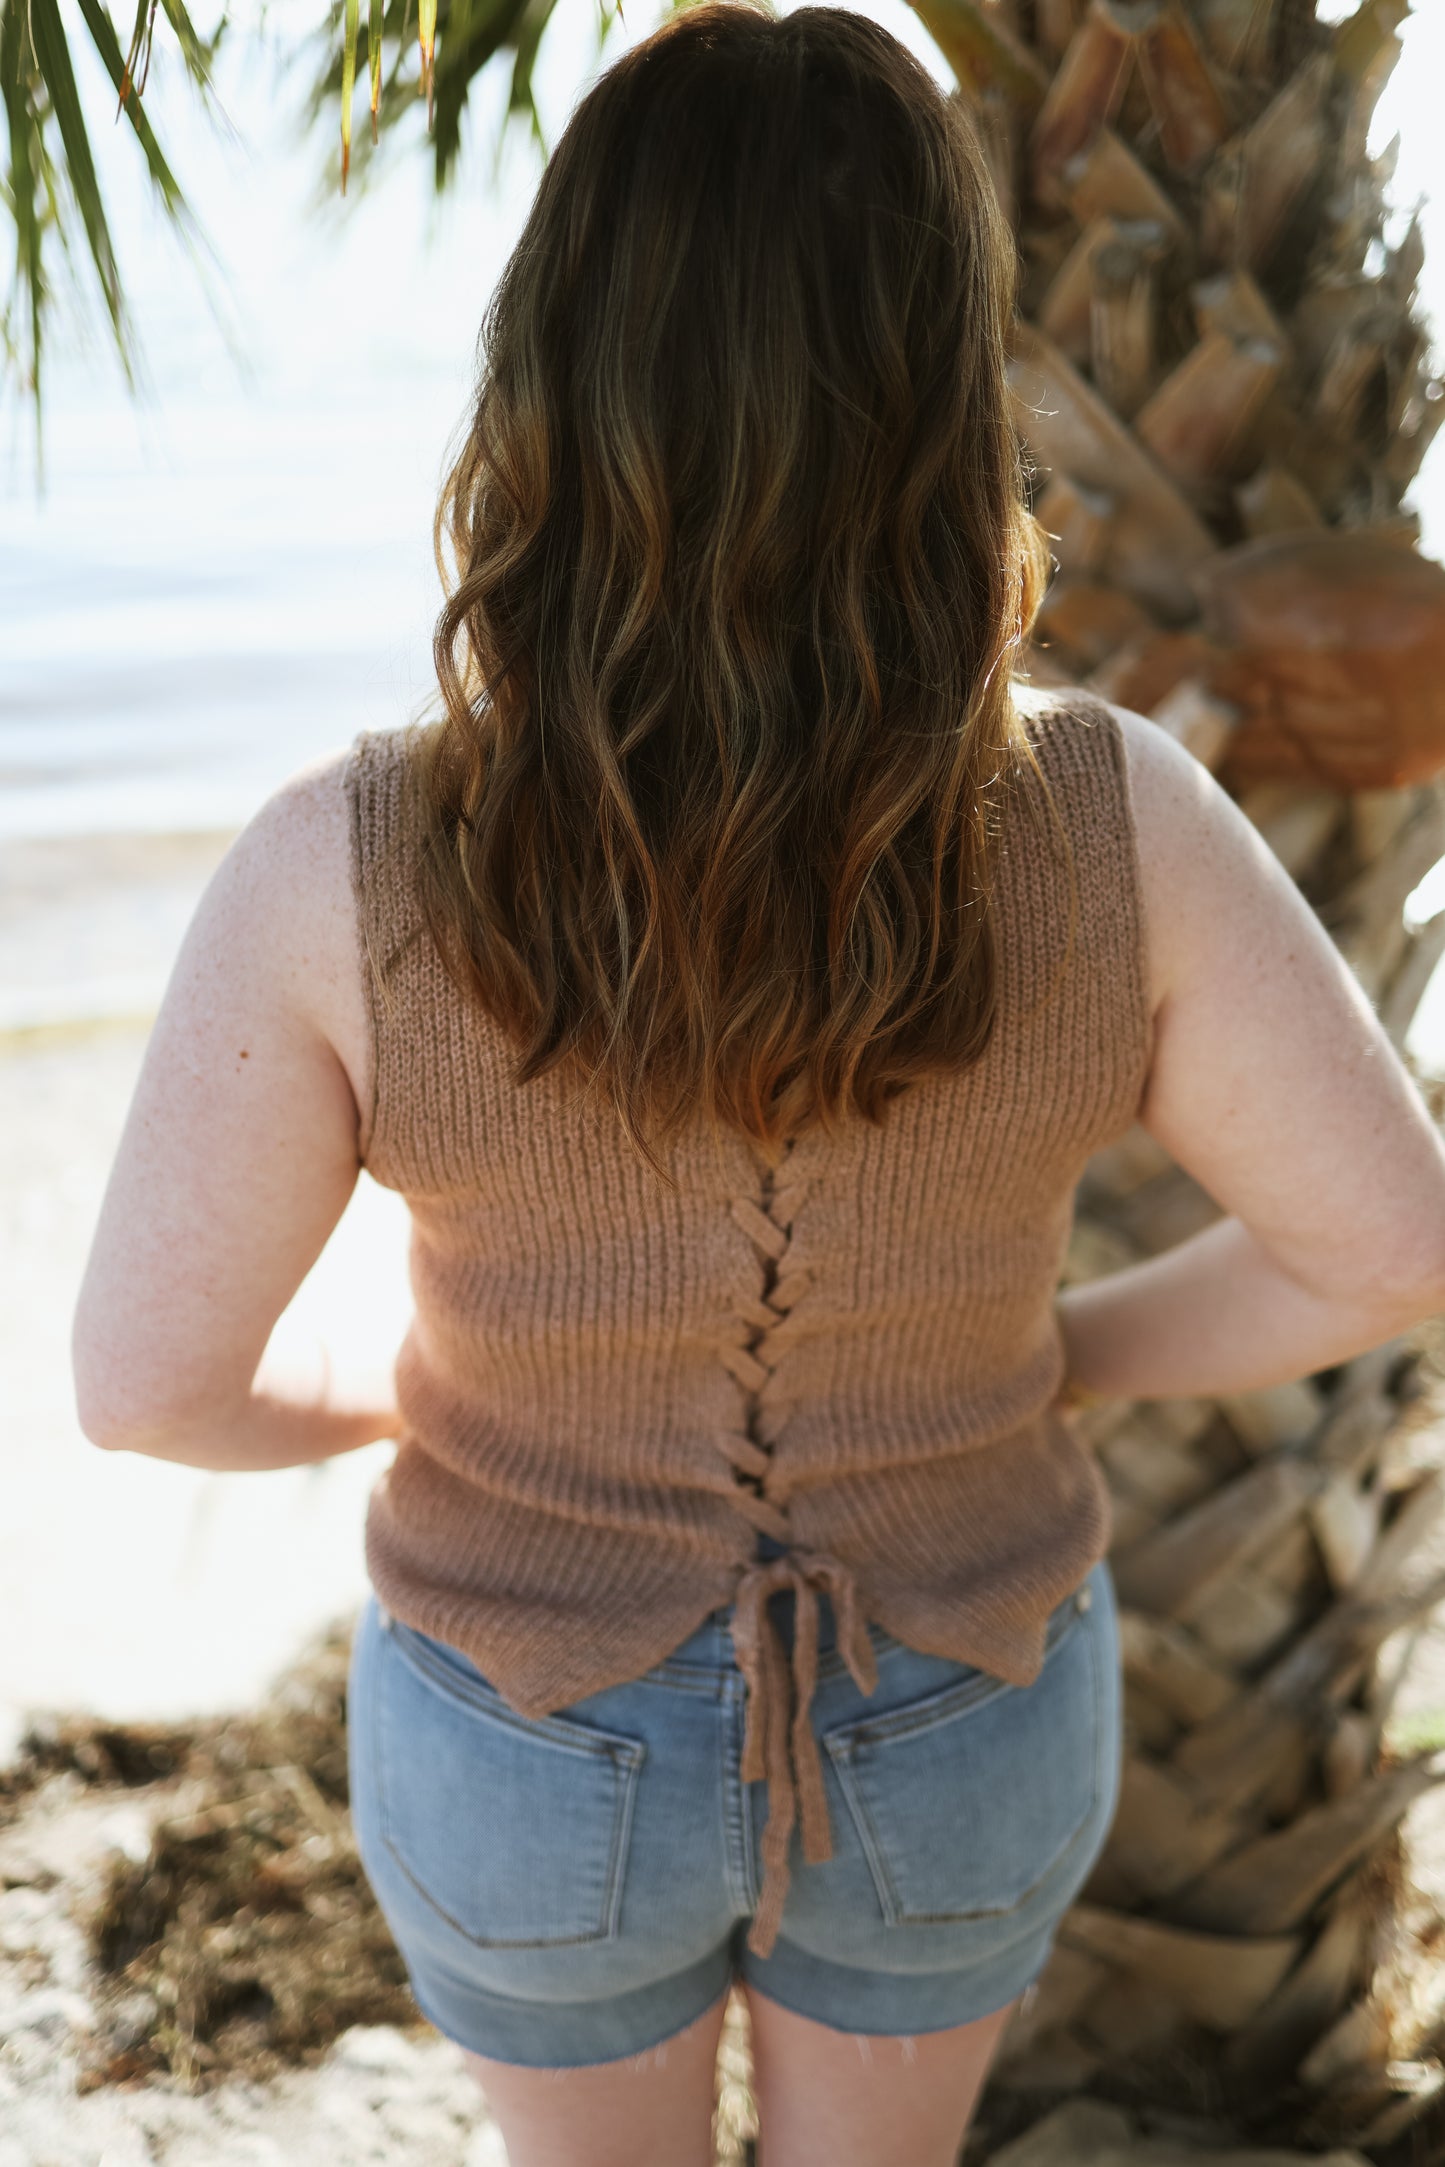 The Ansley Braided Back Knit Tank